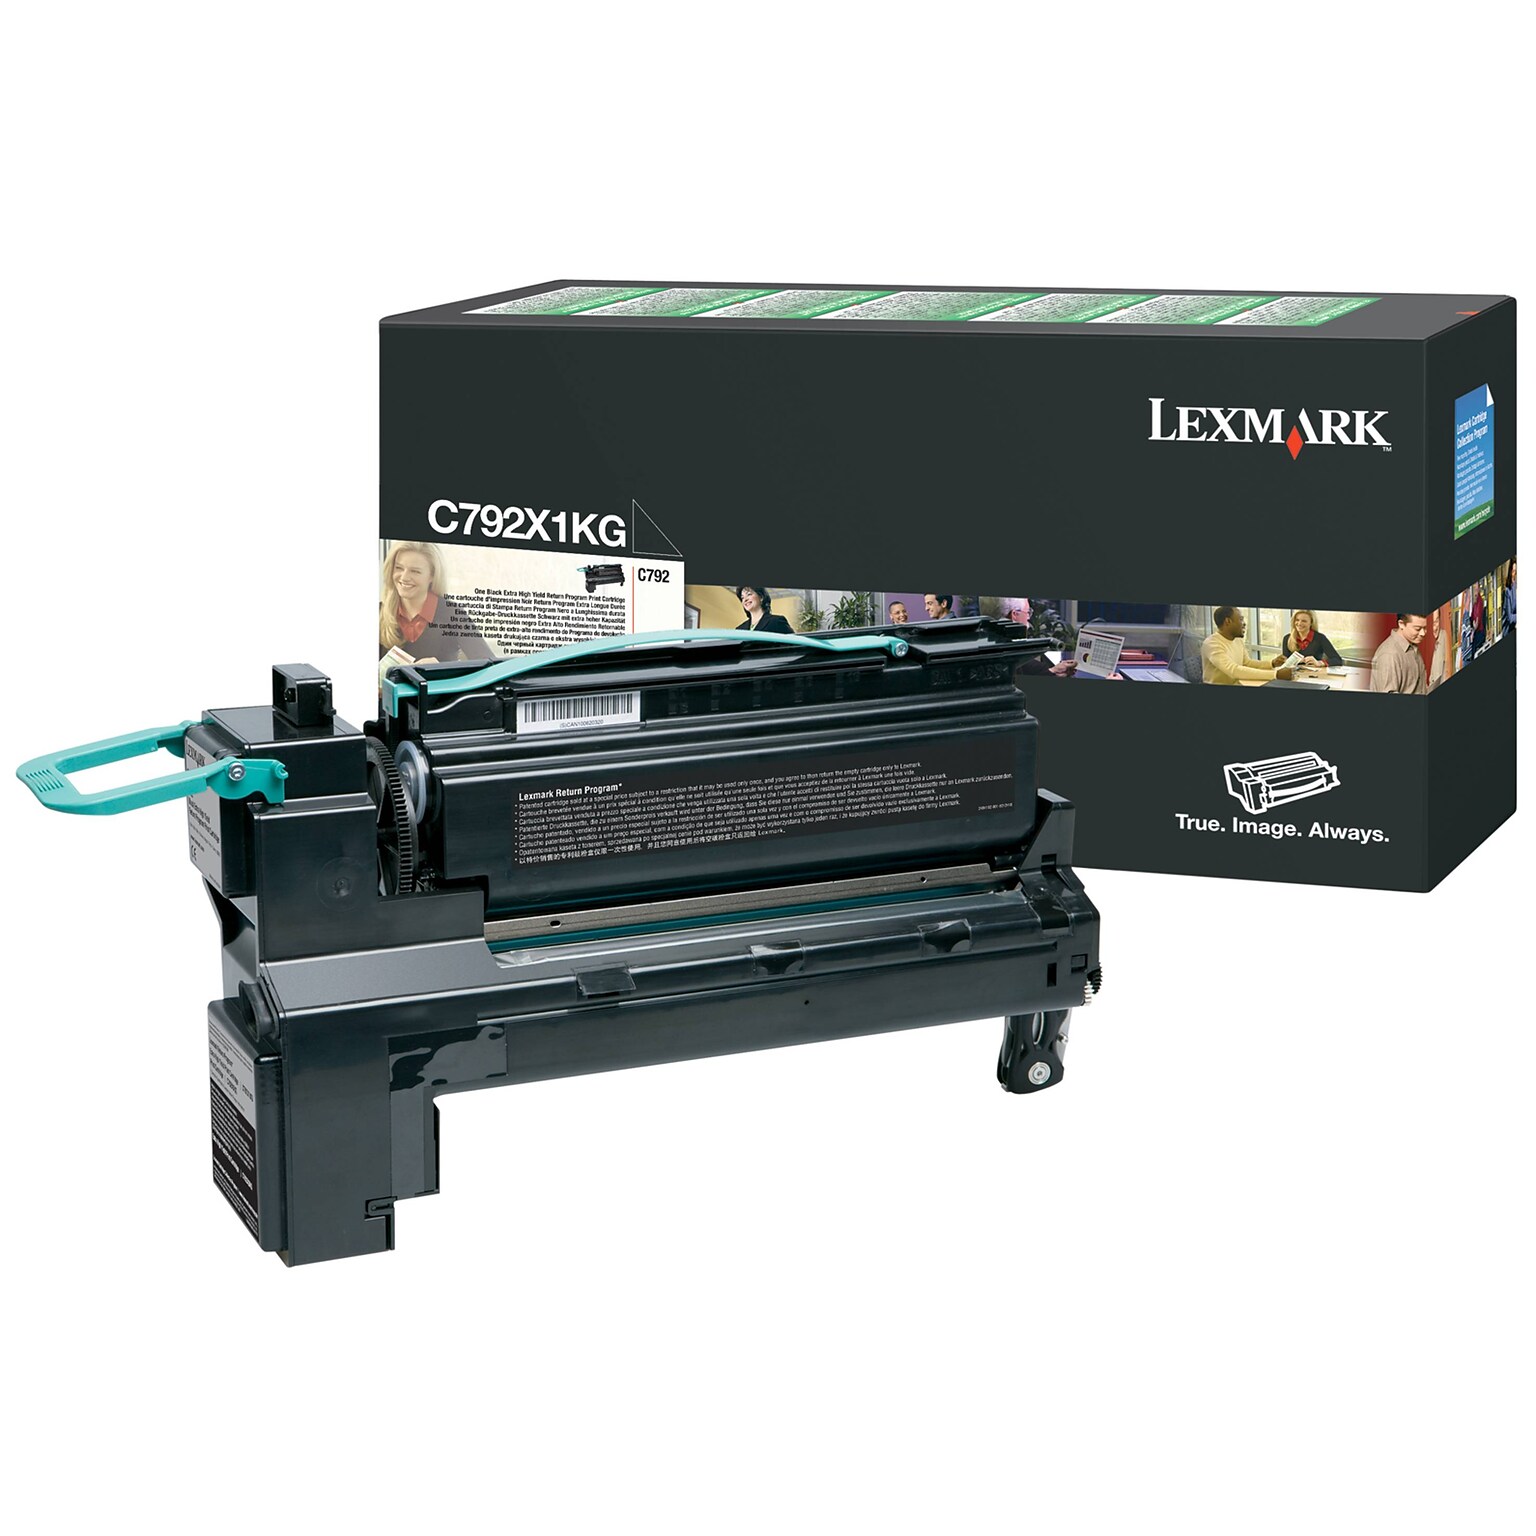 Lexmark C792X1KG Black Extra High Yield Toner Cartridge, Prints Up to 20,000 Pages